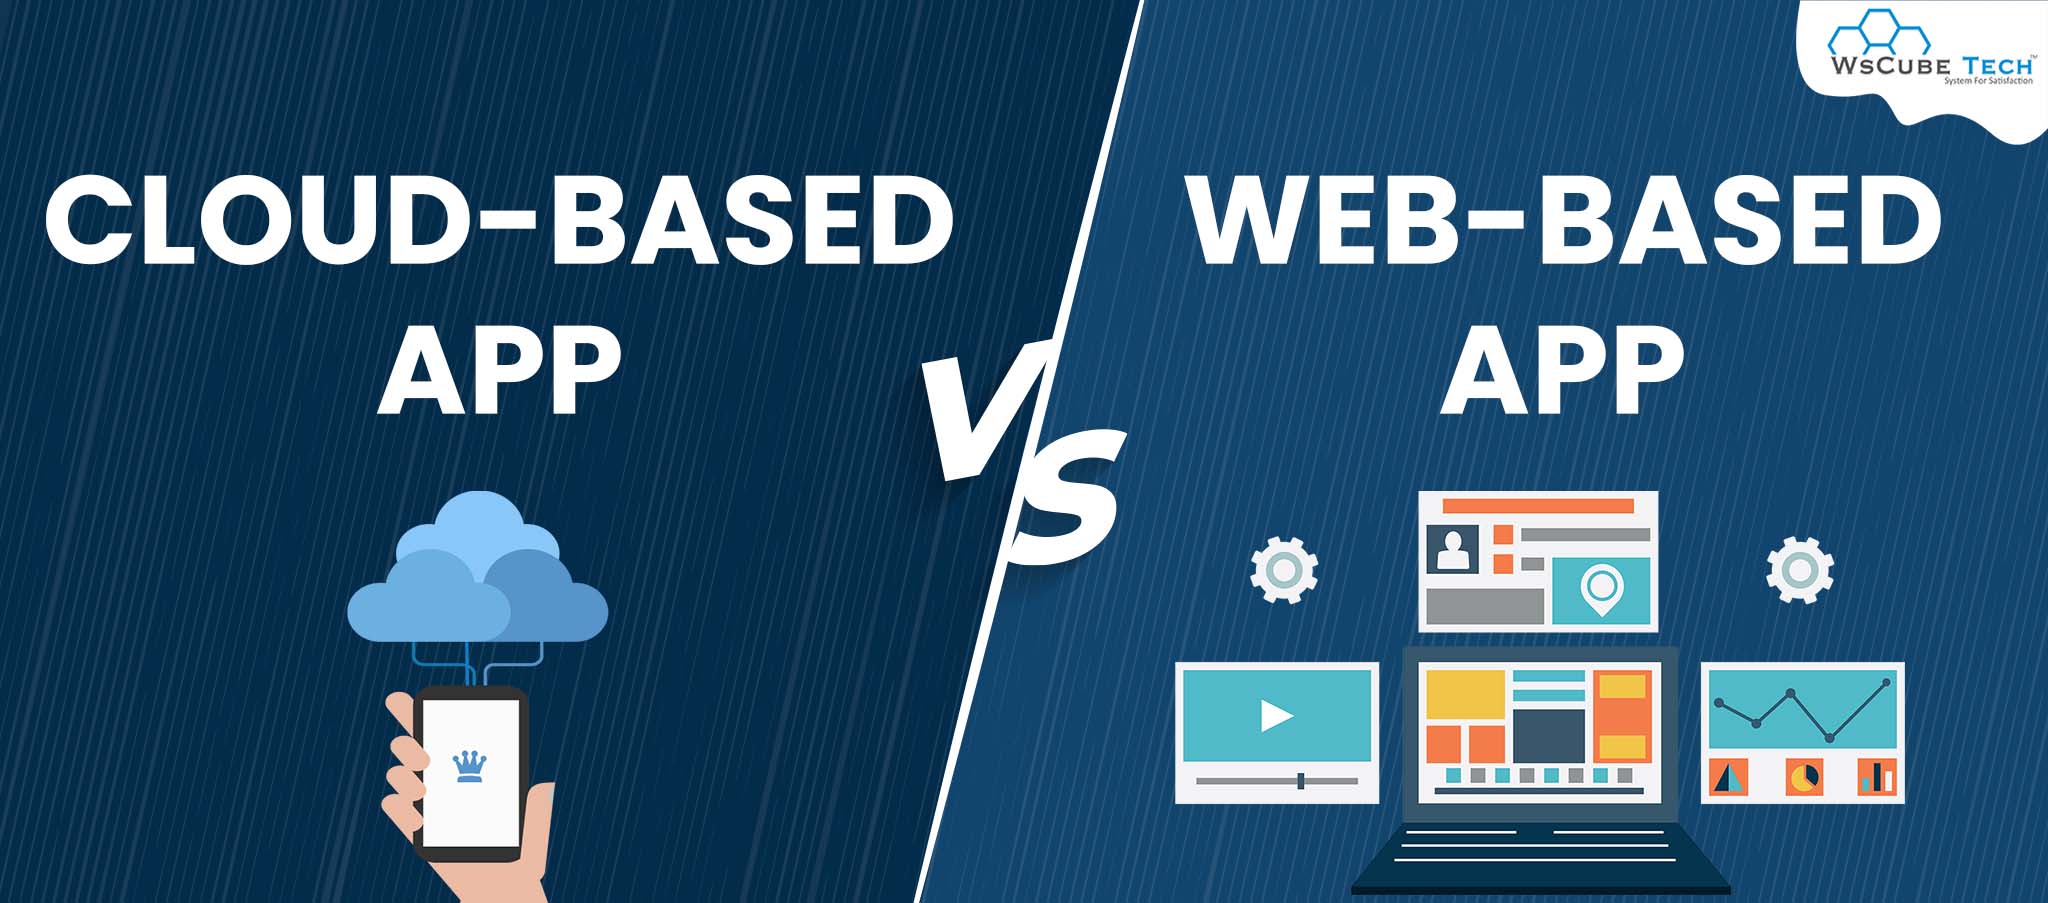 Web-Based Application: What It Is, and Why You Should Use It